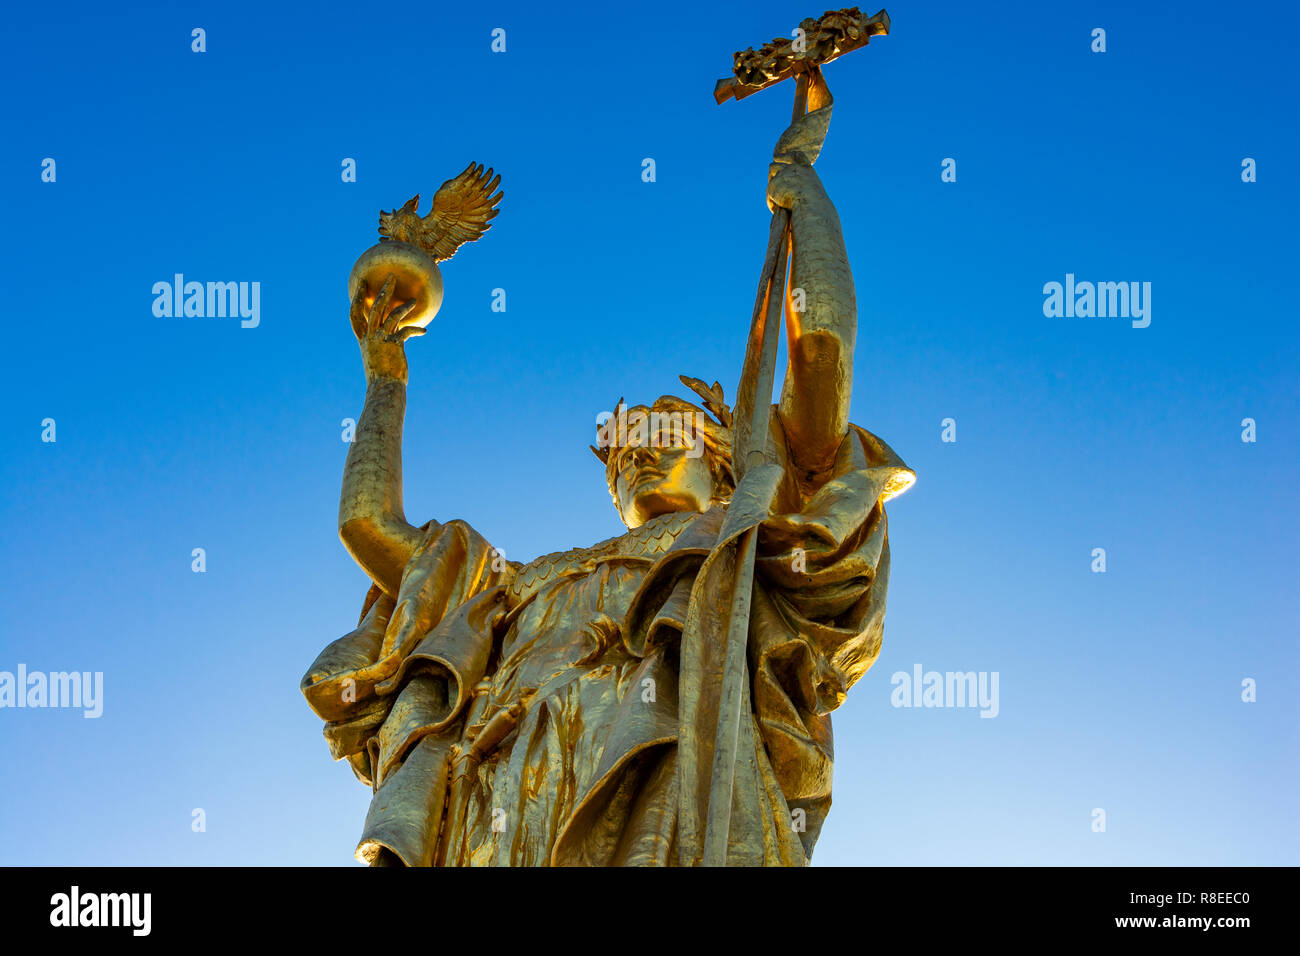 Chicago, IL, United States - December 9, 2018: Shot of the 1918 replica of the original Statue of the Republic, originally made for the 1893 World's C Stock Photo